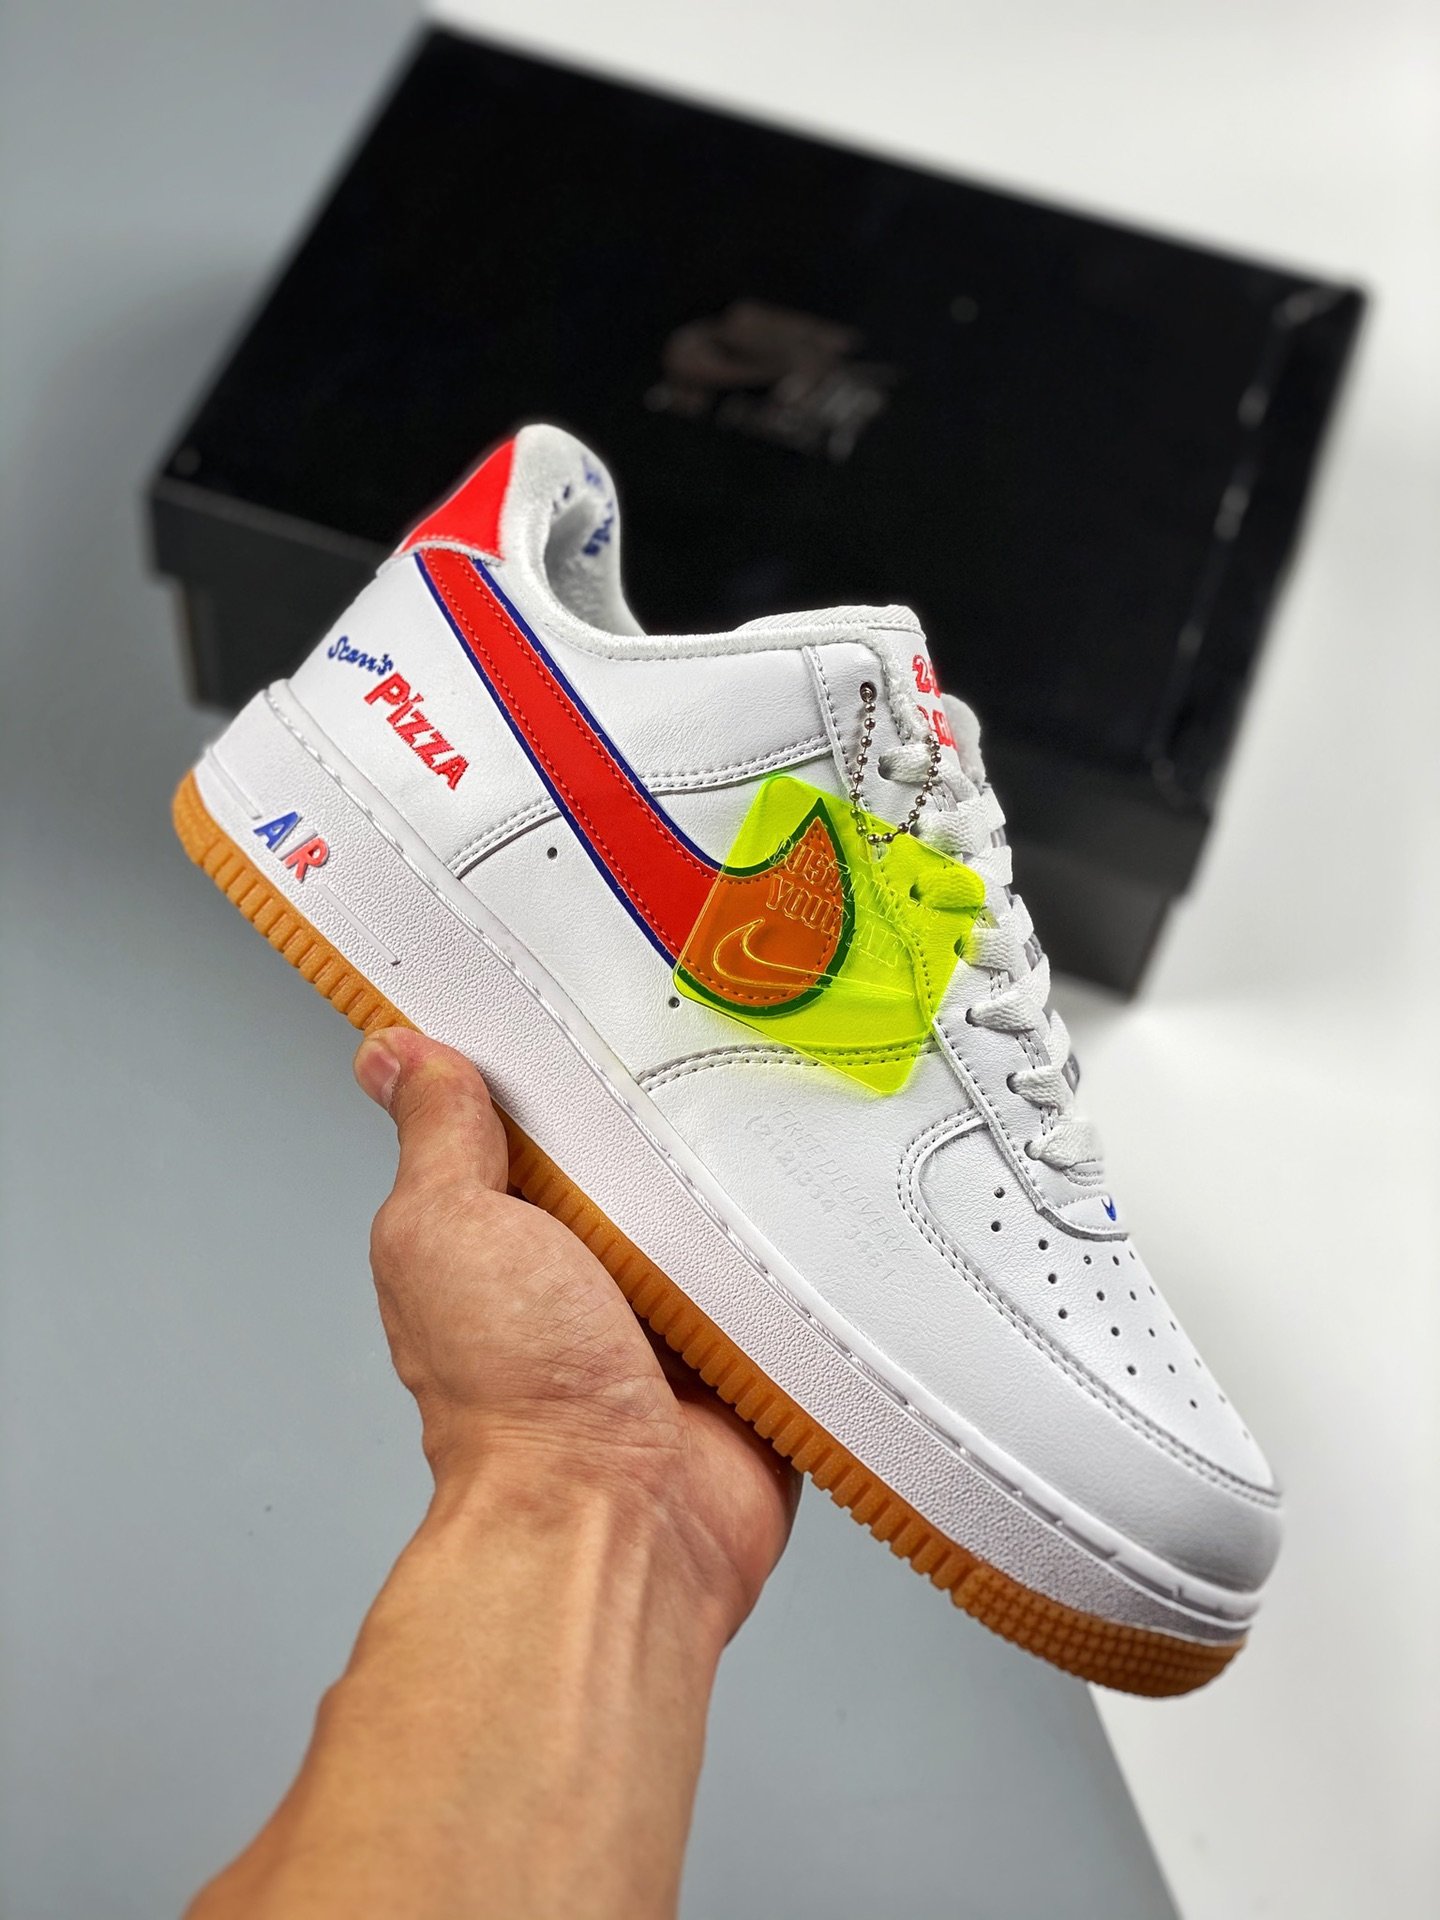 Nike Air AF Force 1 "Scarr's Pizza" White Blue Red Shoes